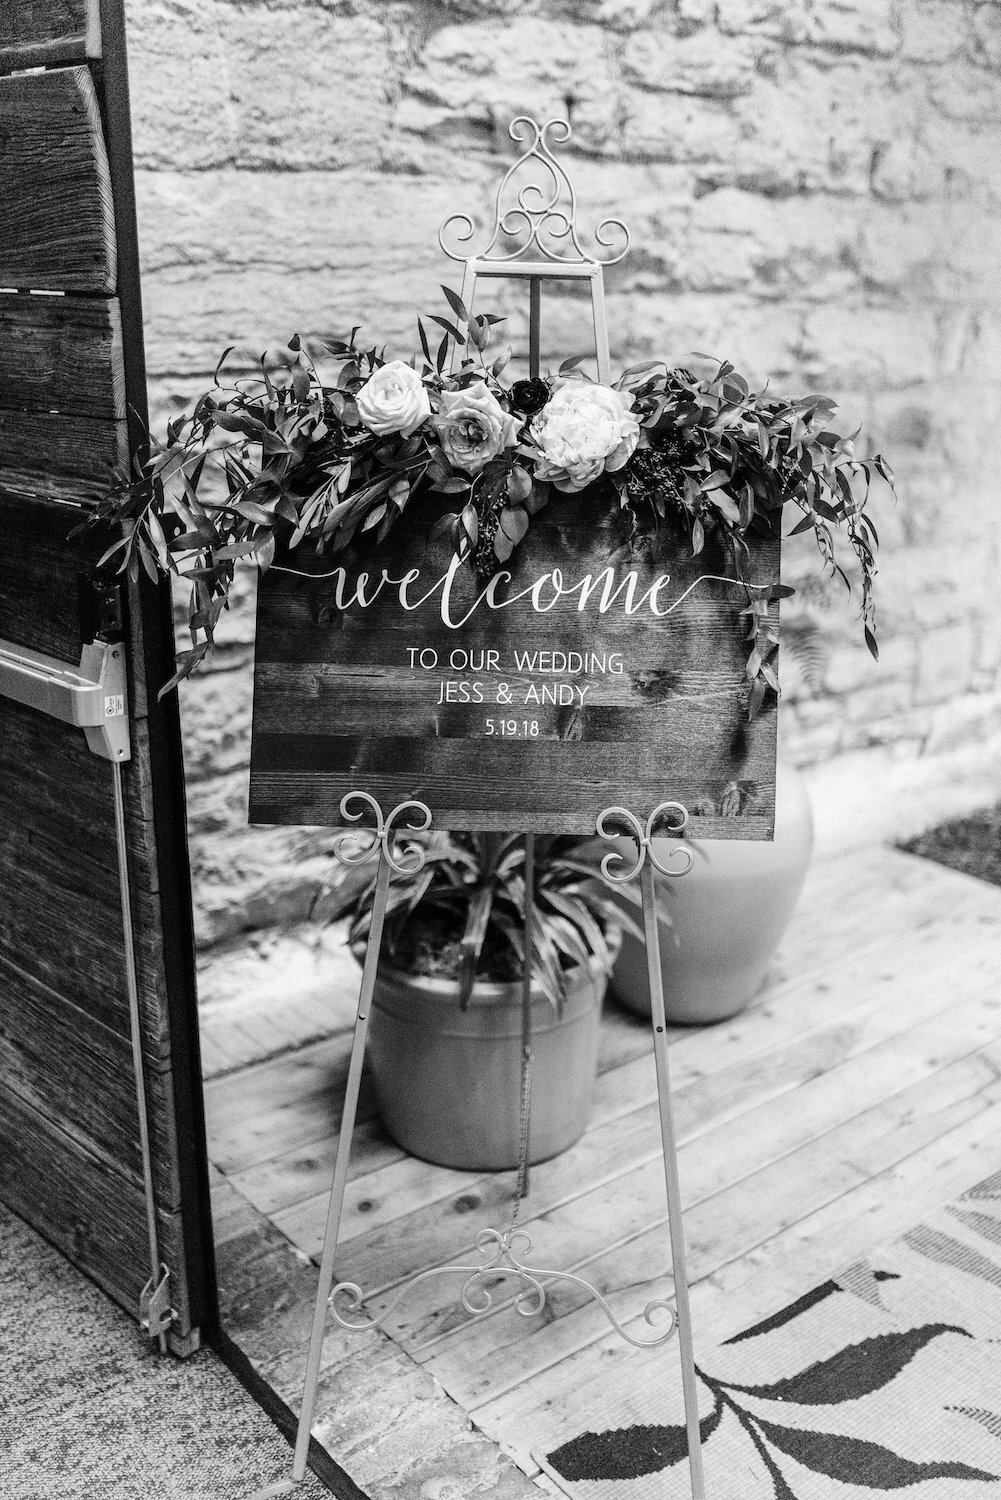 17 Wedding Reception Welcome Sign Flowers Easel.jpg